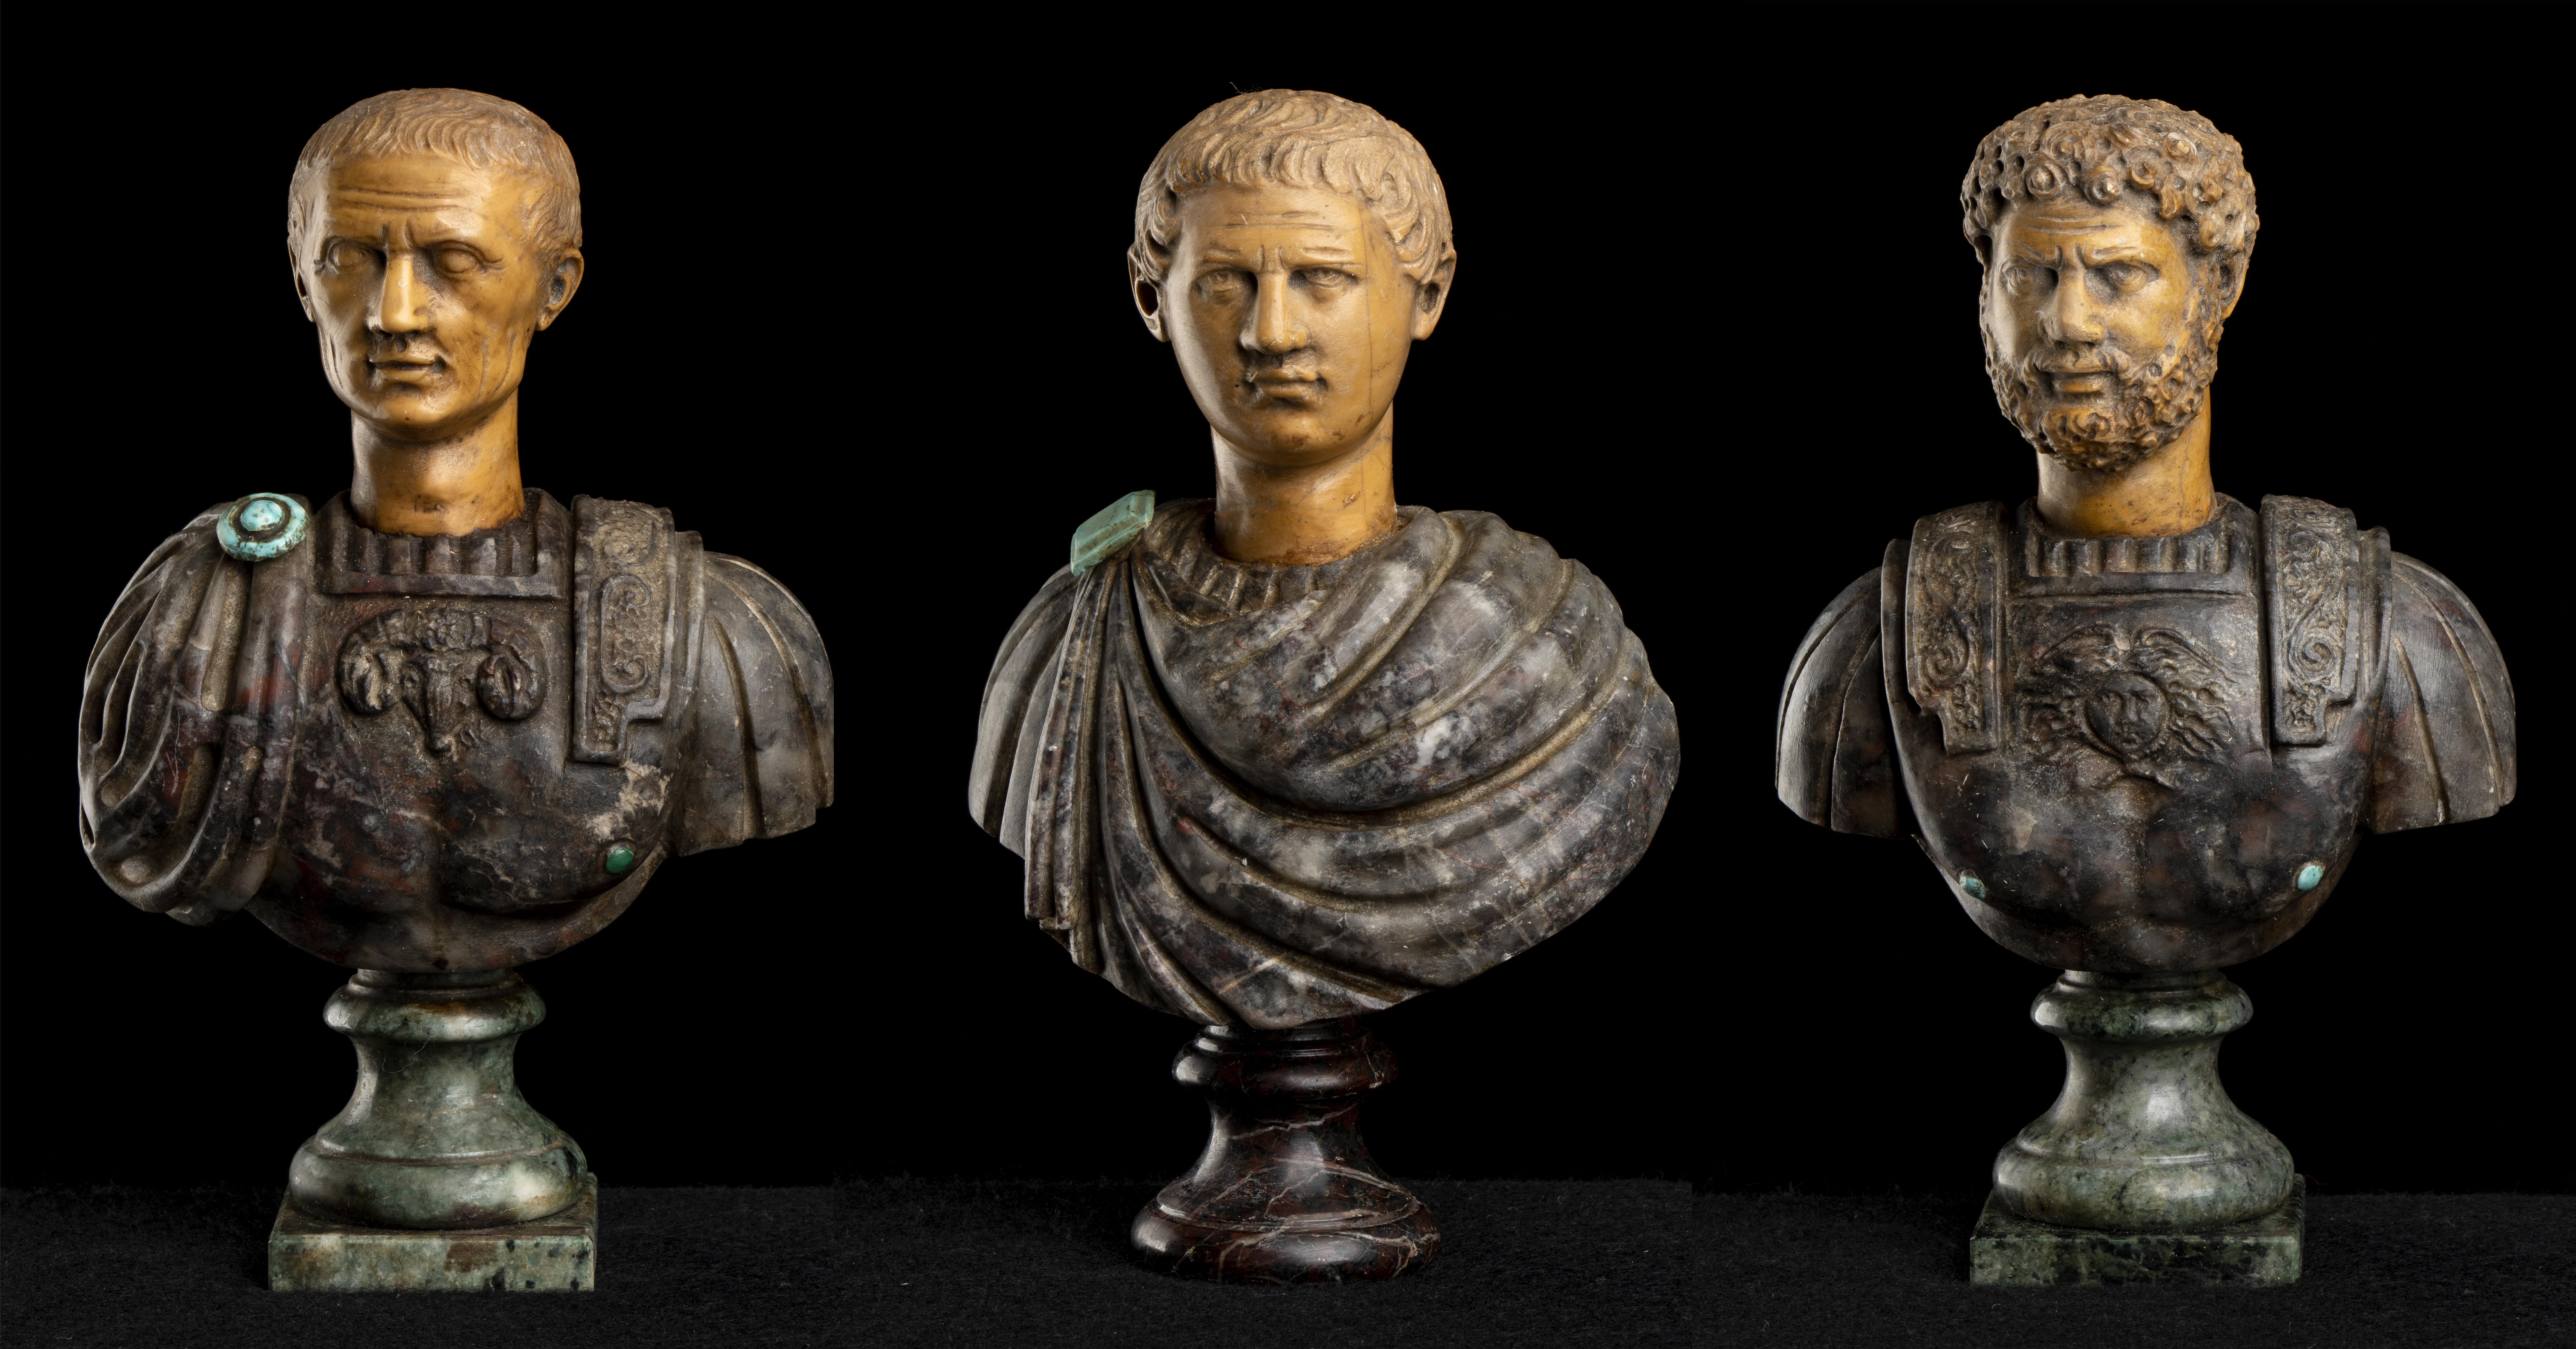 A Grand Tour Set of Three Polychrome Marble Busts Sculptures of Roman Emperors  7